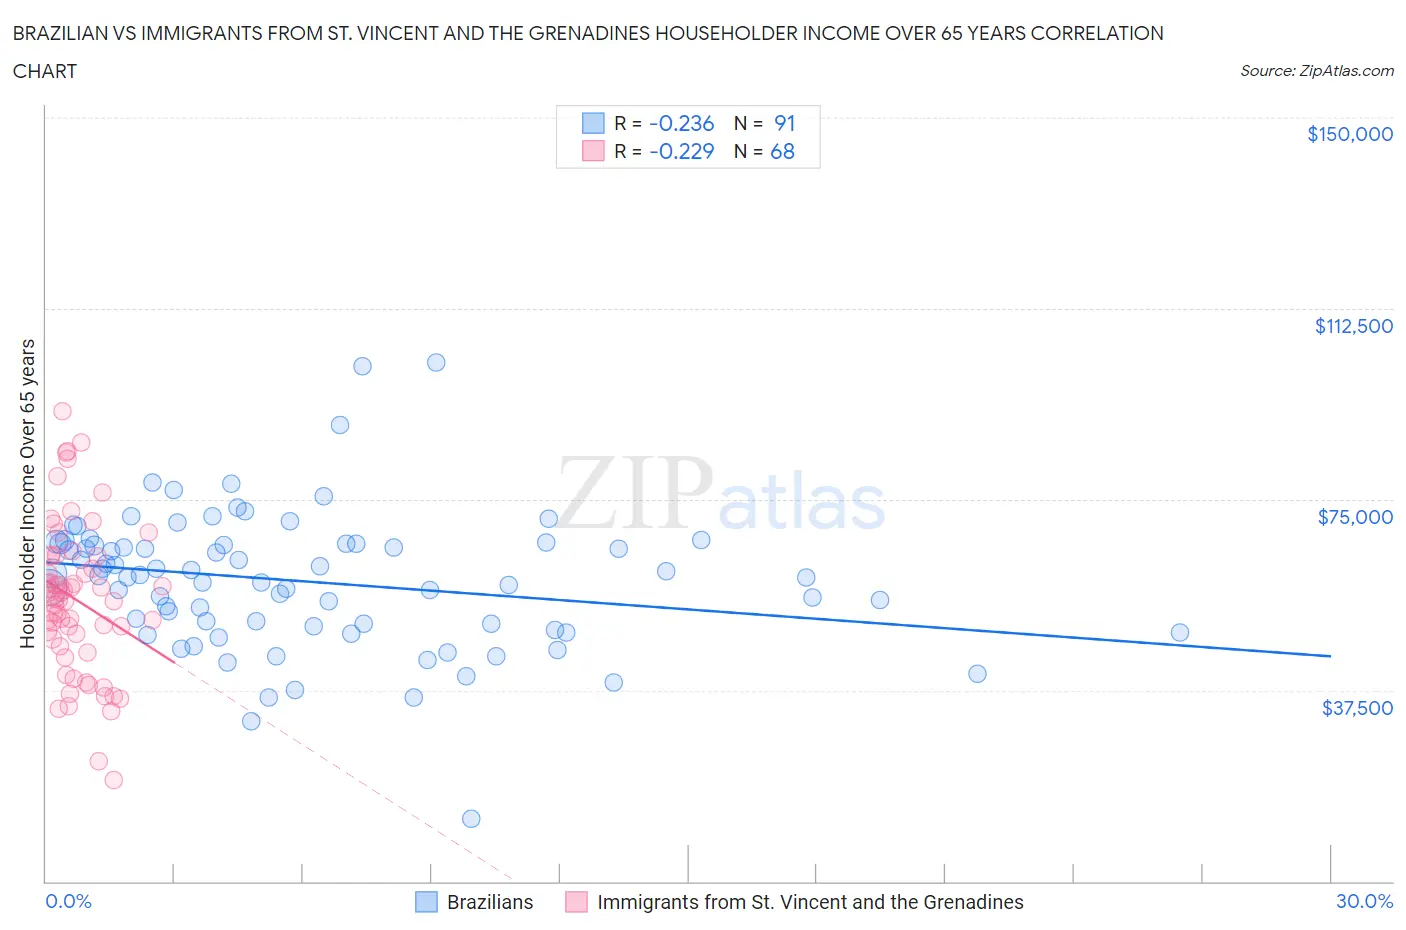 Brazilian vs Immigrants from St. Vincent and the Grenadines Householder Income Over 65 years